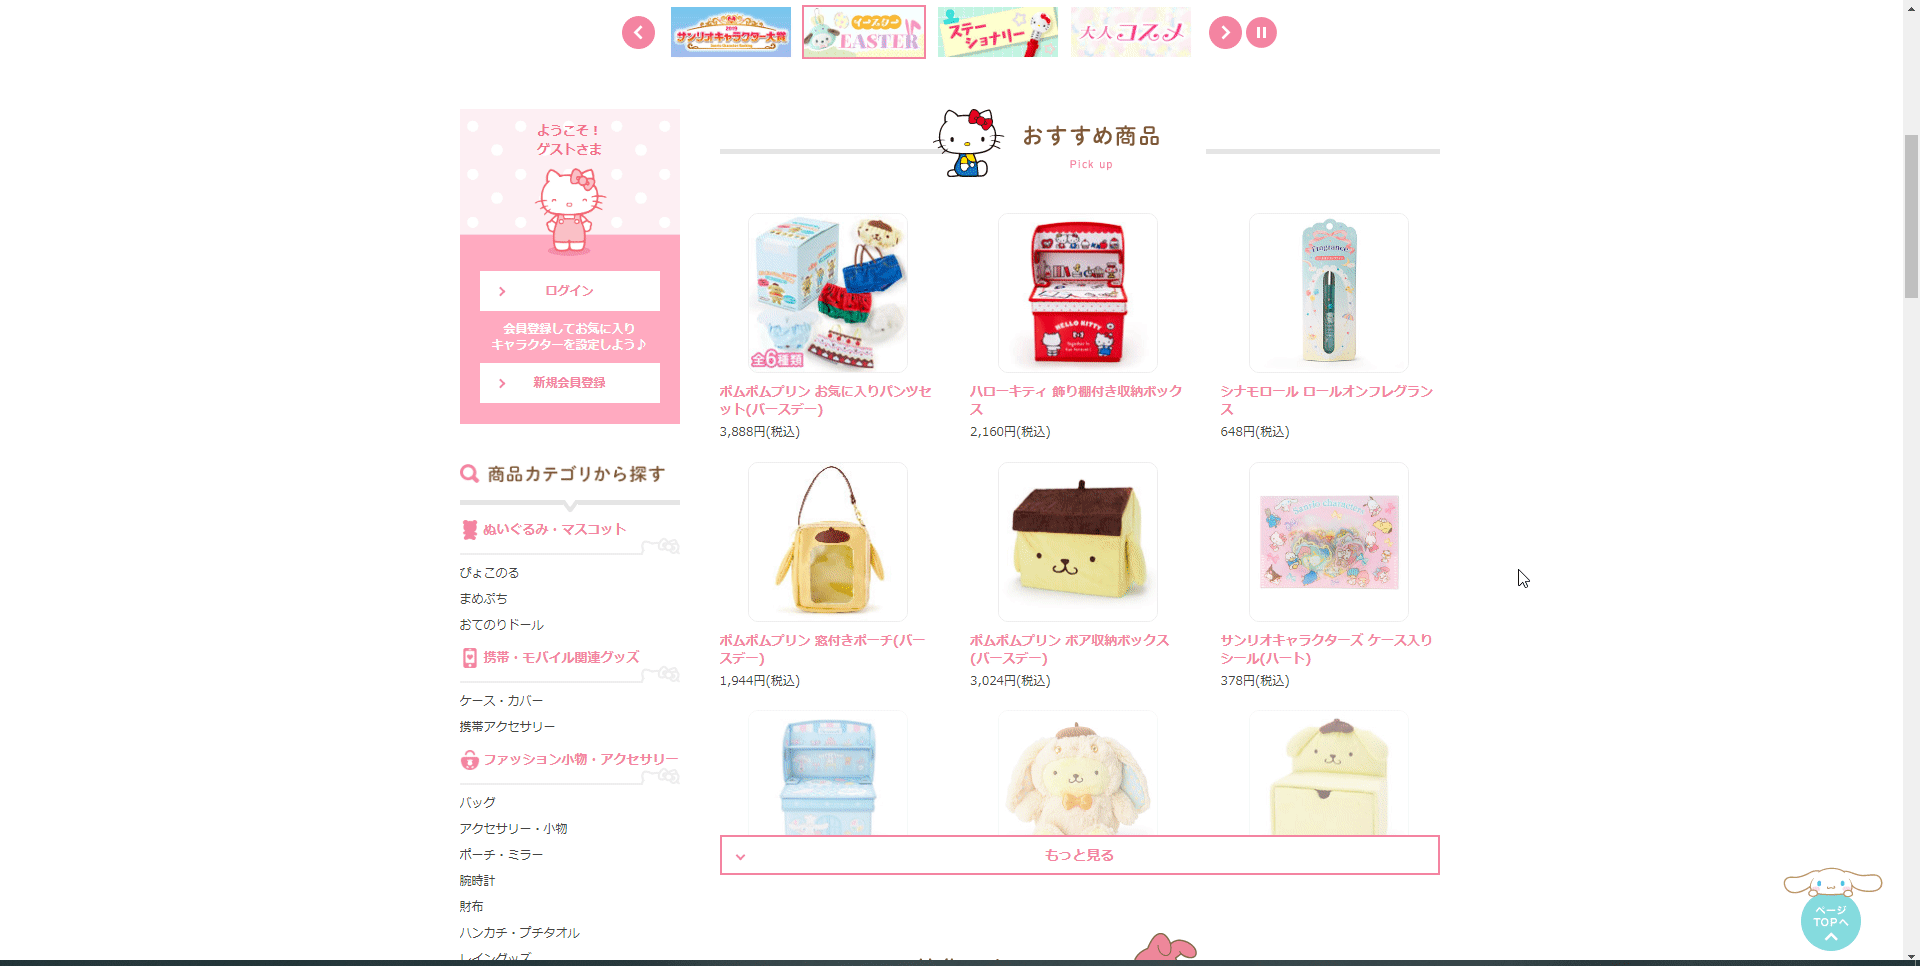 Translate The Sanrio Japan Online Store to English with Google Translate